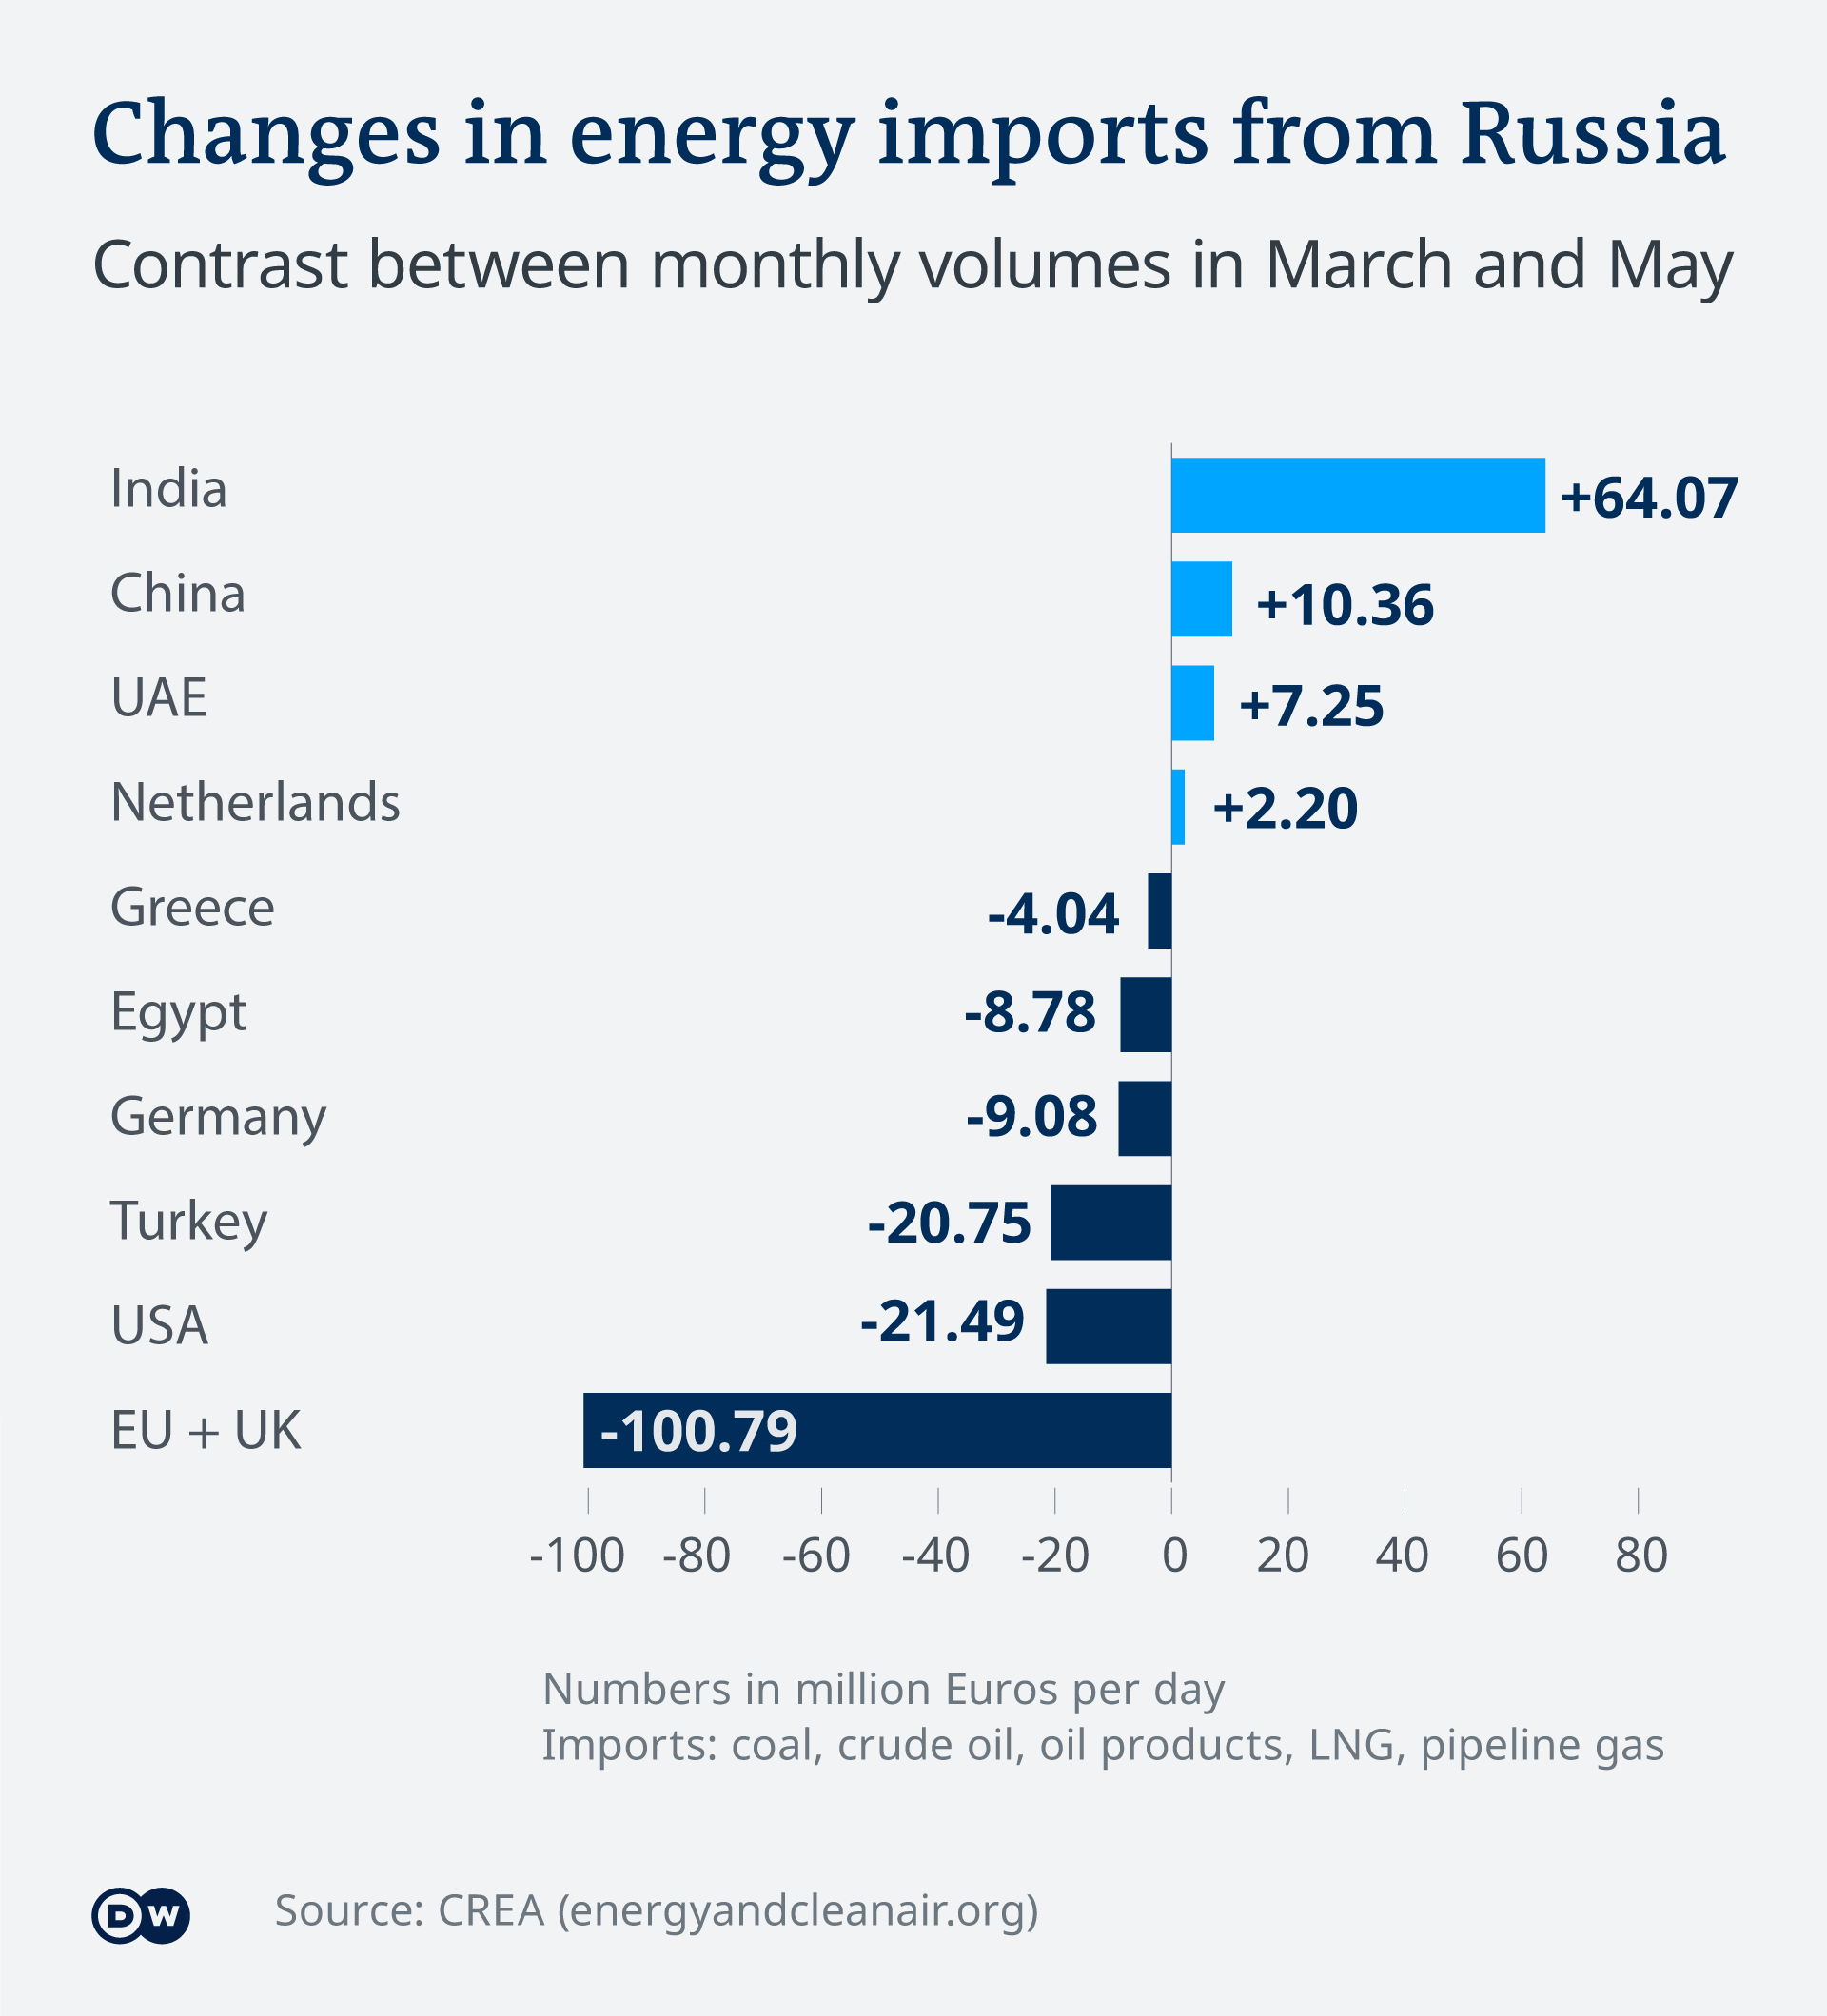 A chart showing energy imports to countries from Rusia